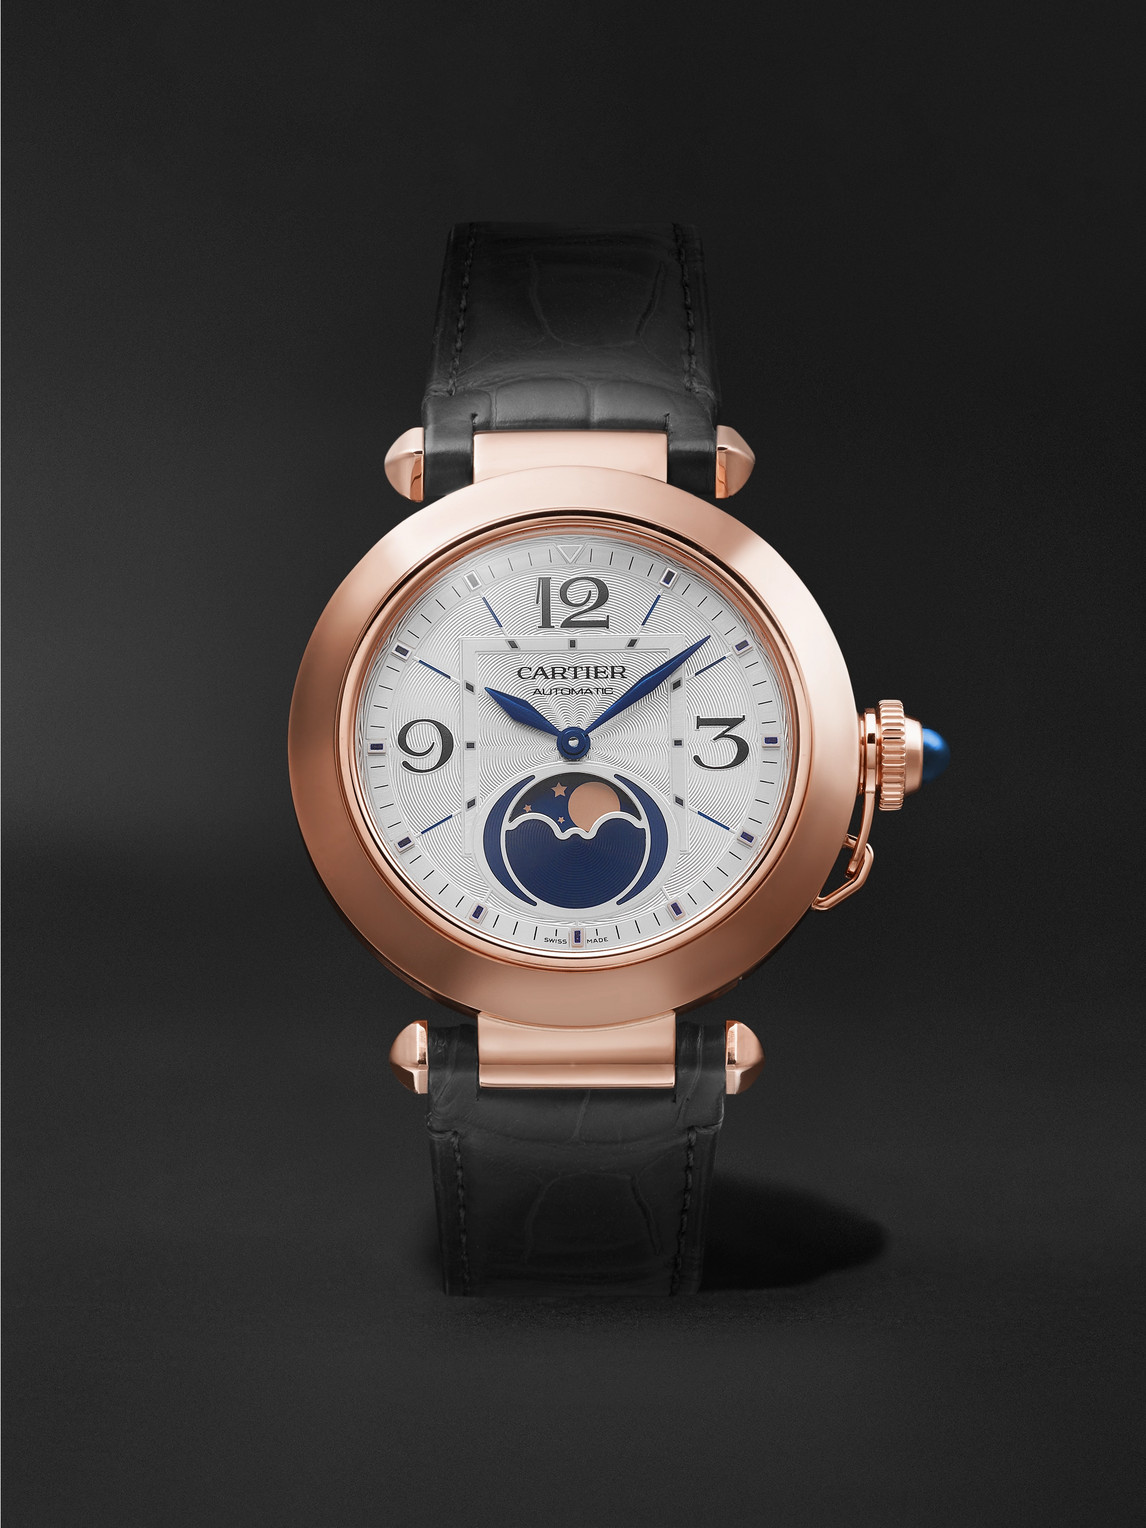 Cartier Pasha De  Automatic Moon-phase 41mm 18-karat Rose Gold And Alligator Watch, Ref. No. Wgpa0026 In White